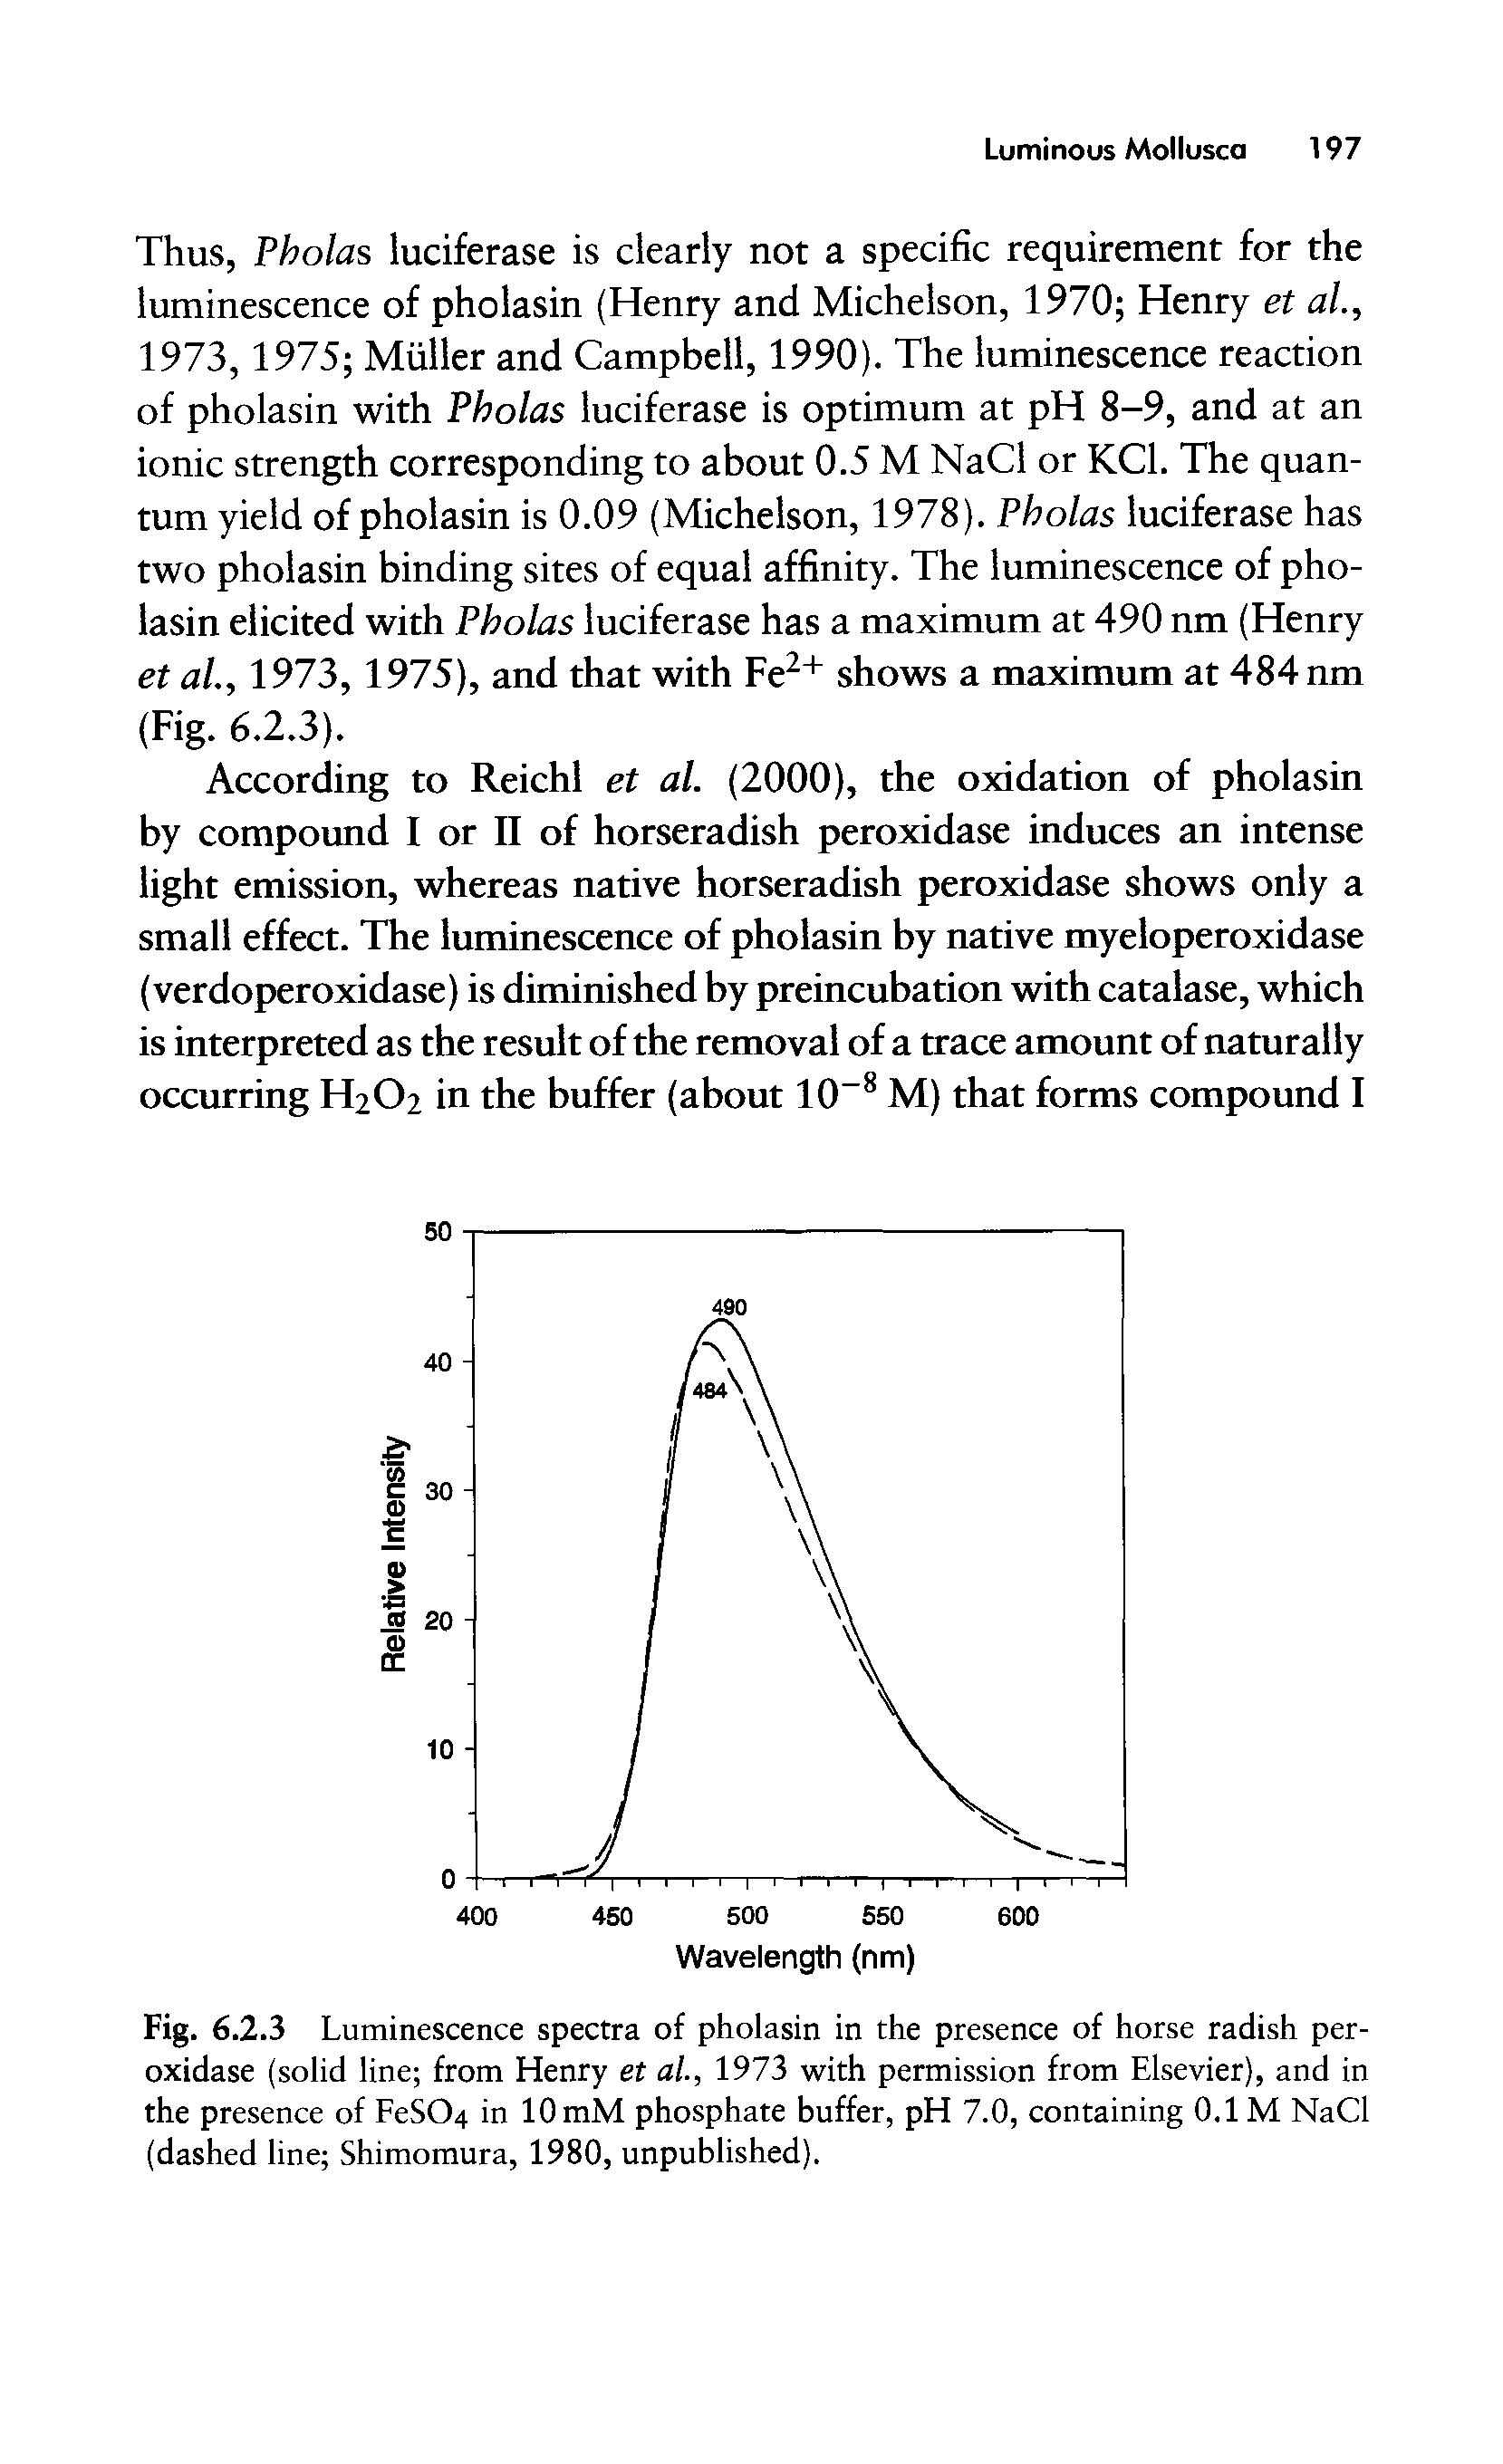 Fig. 6.2.3 Luminescence spectra of pholasin in the presence of horse radish peroxidase (solid line from Henry et al, 1973 with permission from Elsevier), and in the presence of FeSC>4 in 10 mM phosphate buffer, pH 7.0, containing 0.1 M NaCl (dashed line Shimomura, 1980, unpublished).